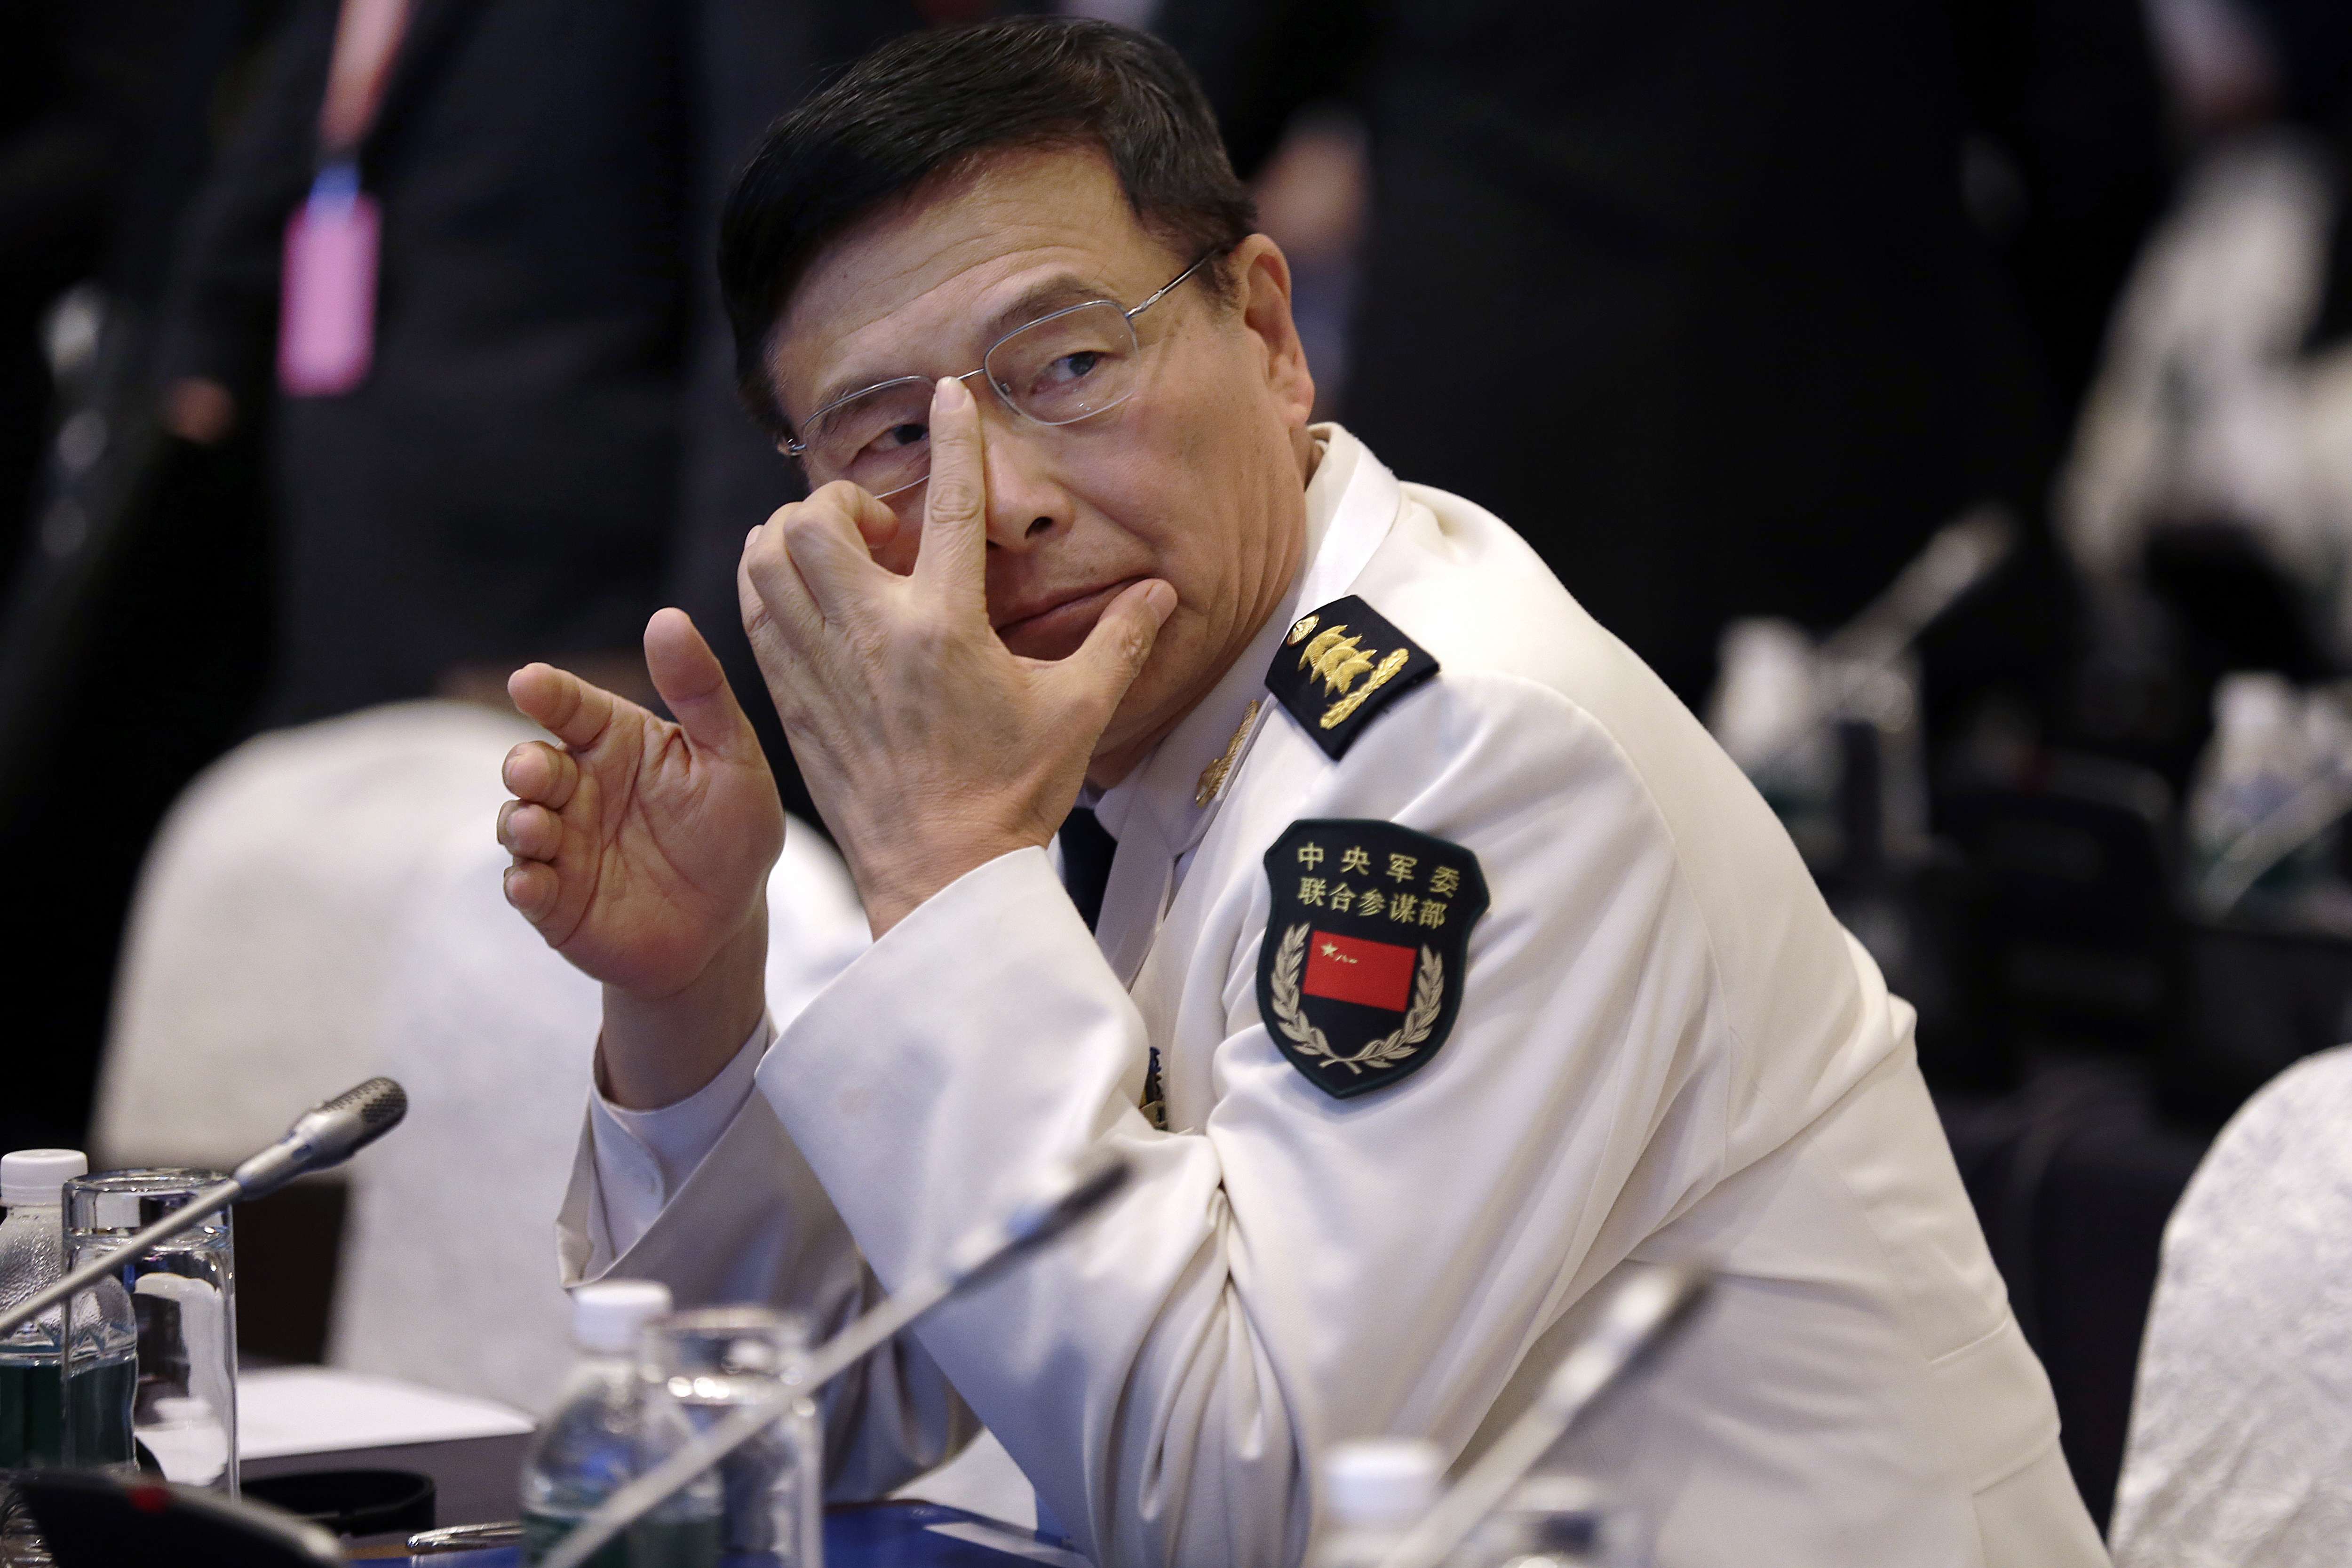 Admiral Sun Jianguo delivered his speech in a booming, shrill tone that seemed designed to intimidate the audience. Photo: AP